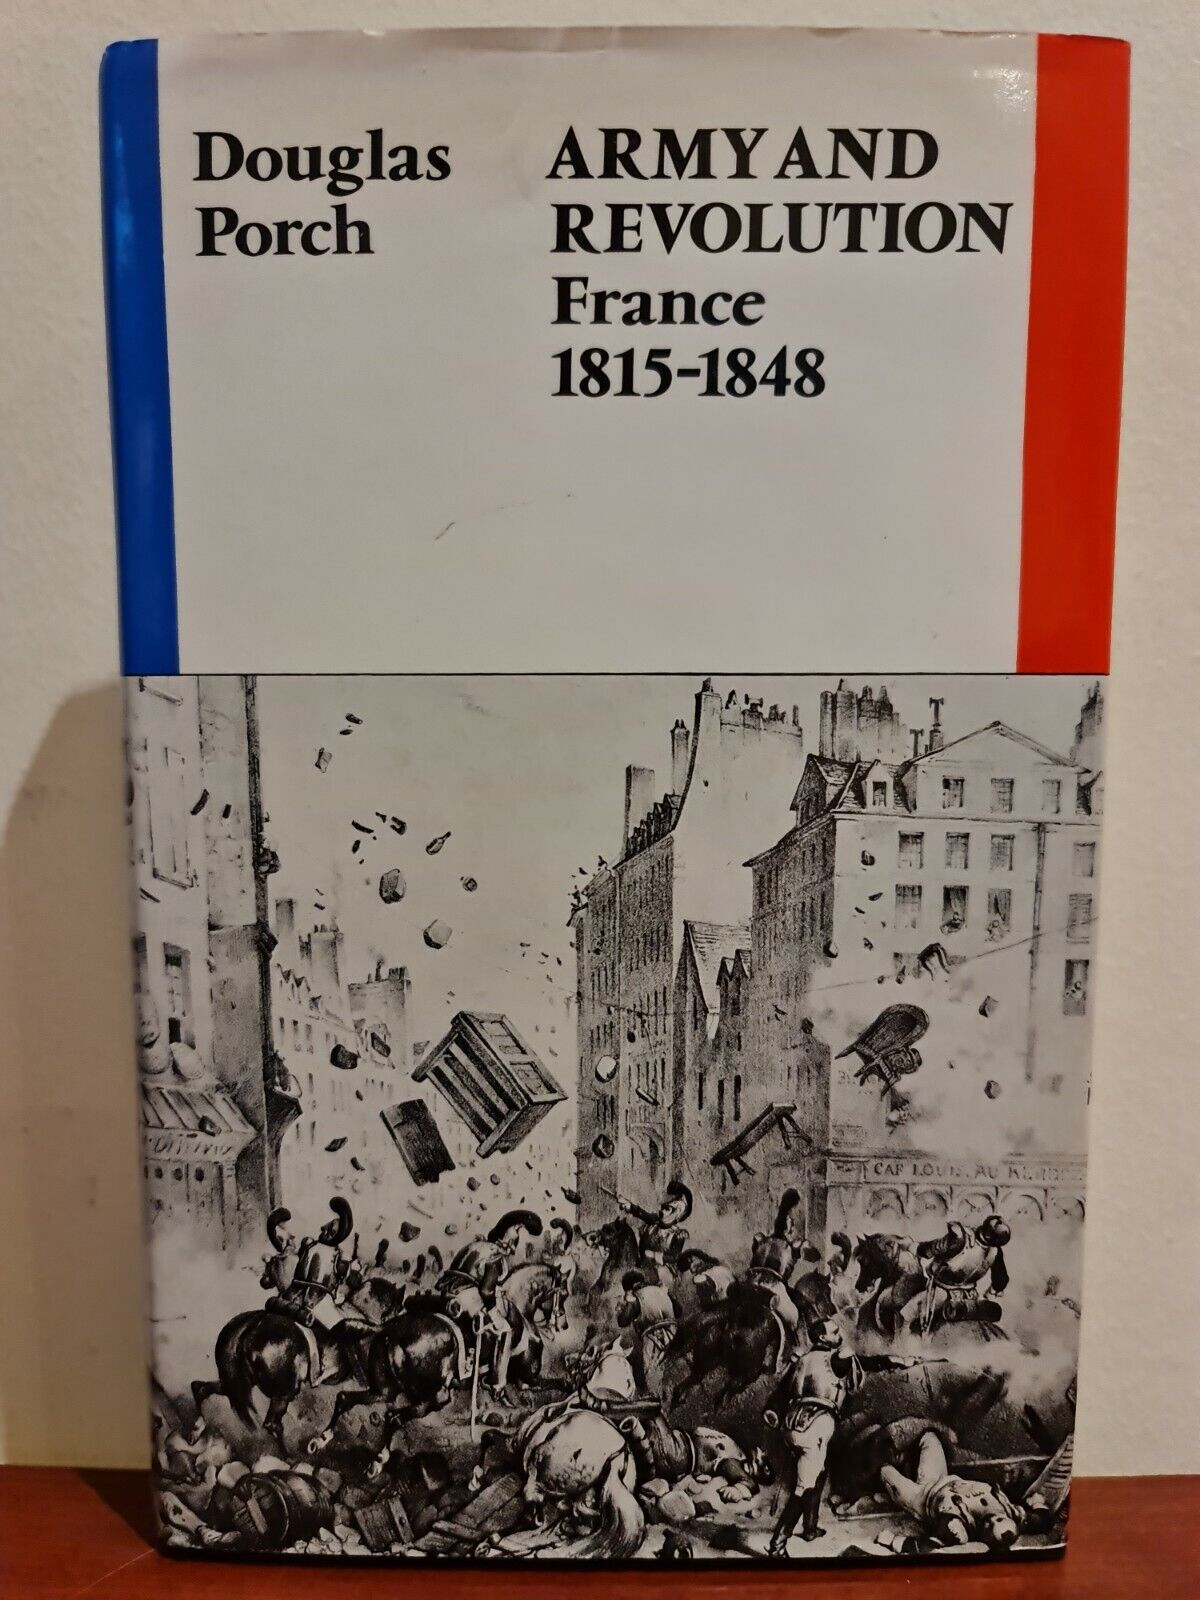 SIGNED - Army and Revolution: France, 1815-48 by Douglas Porch